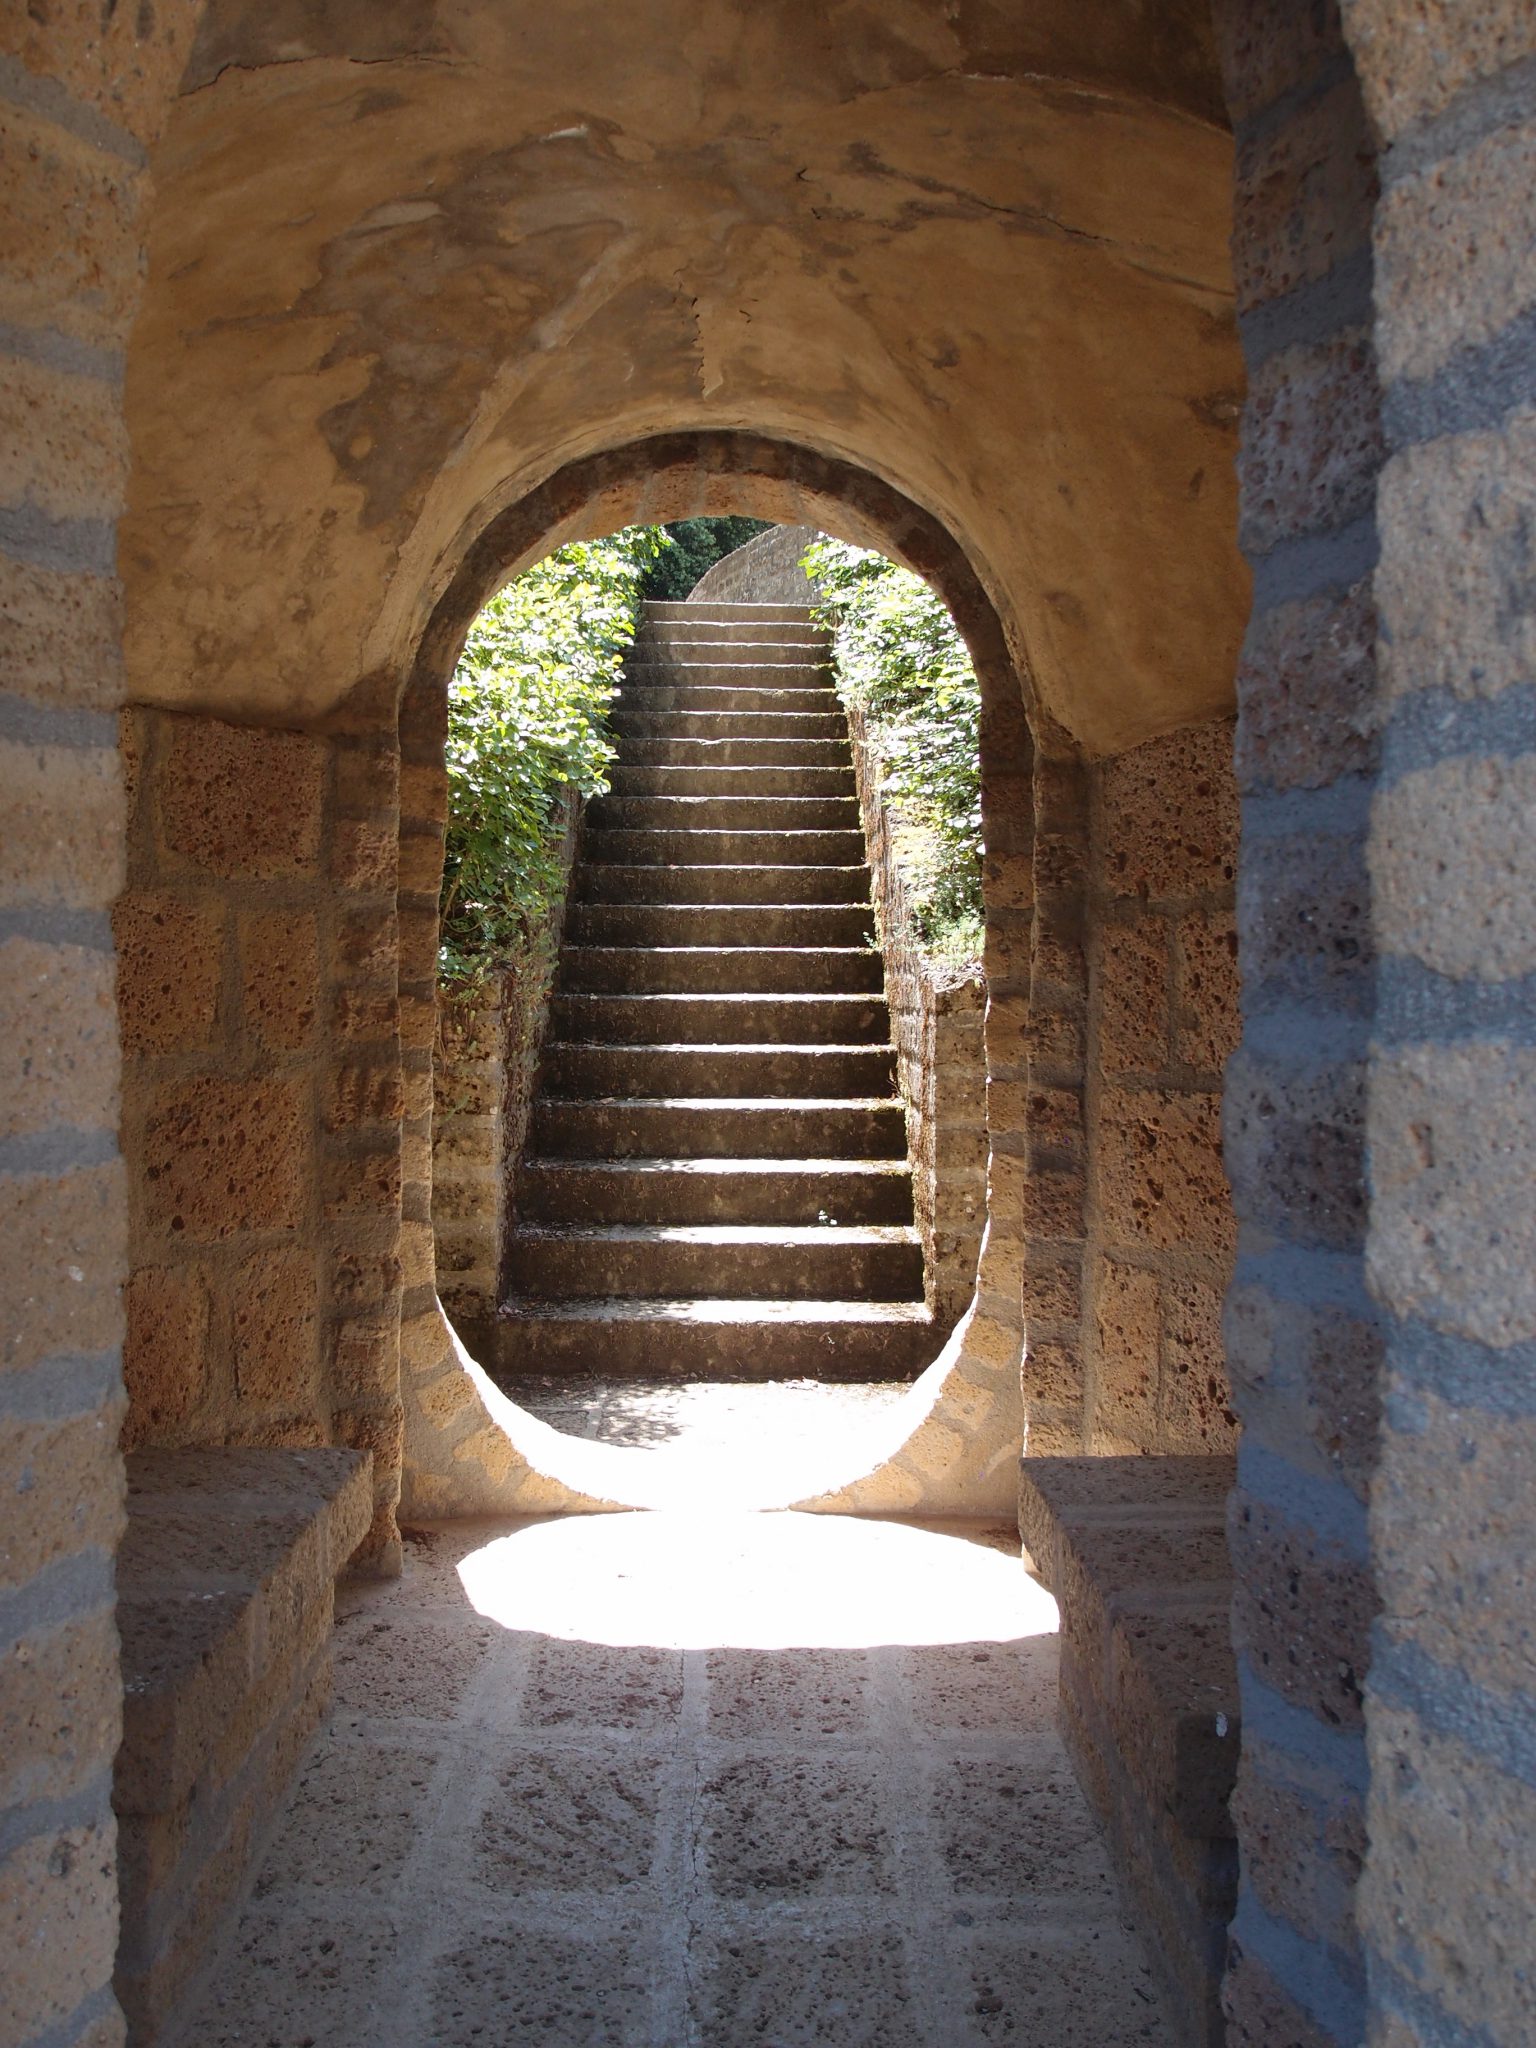 A beautifully-formed passage through the base of the Ruined Column. The stairs lead uphill, to a portion of the Ideal City which we must still visit.